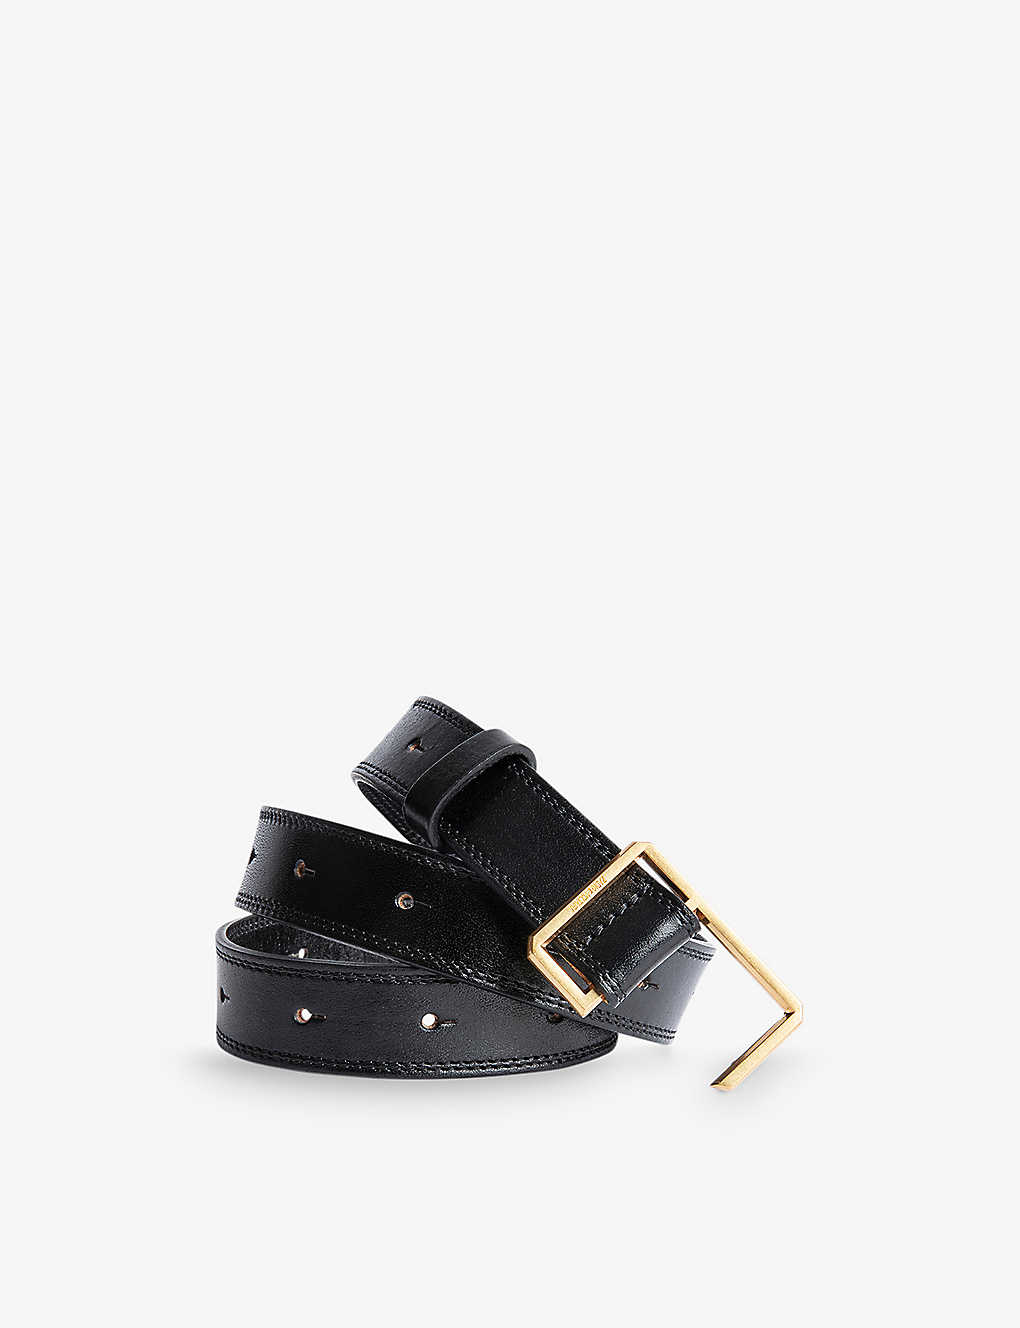 Zadig & Voltaire Cecilia Leather Belt In Noir